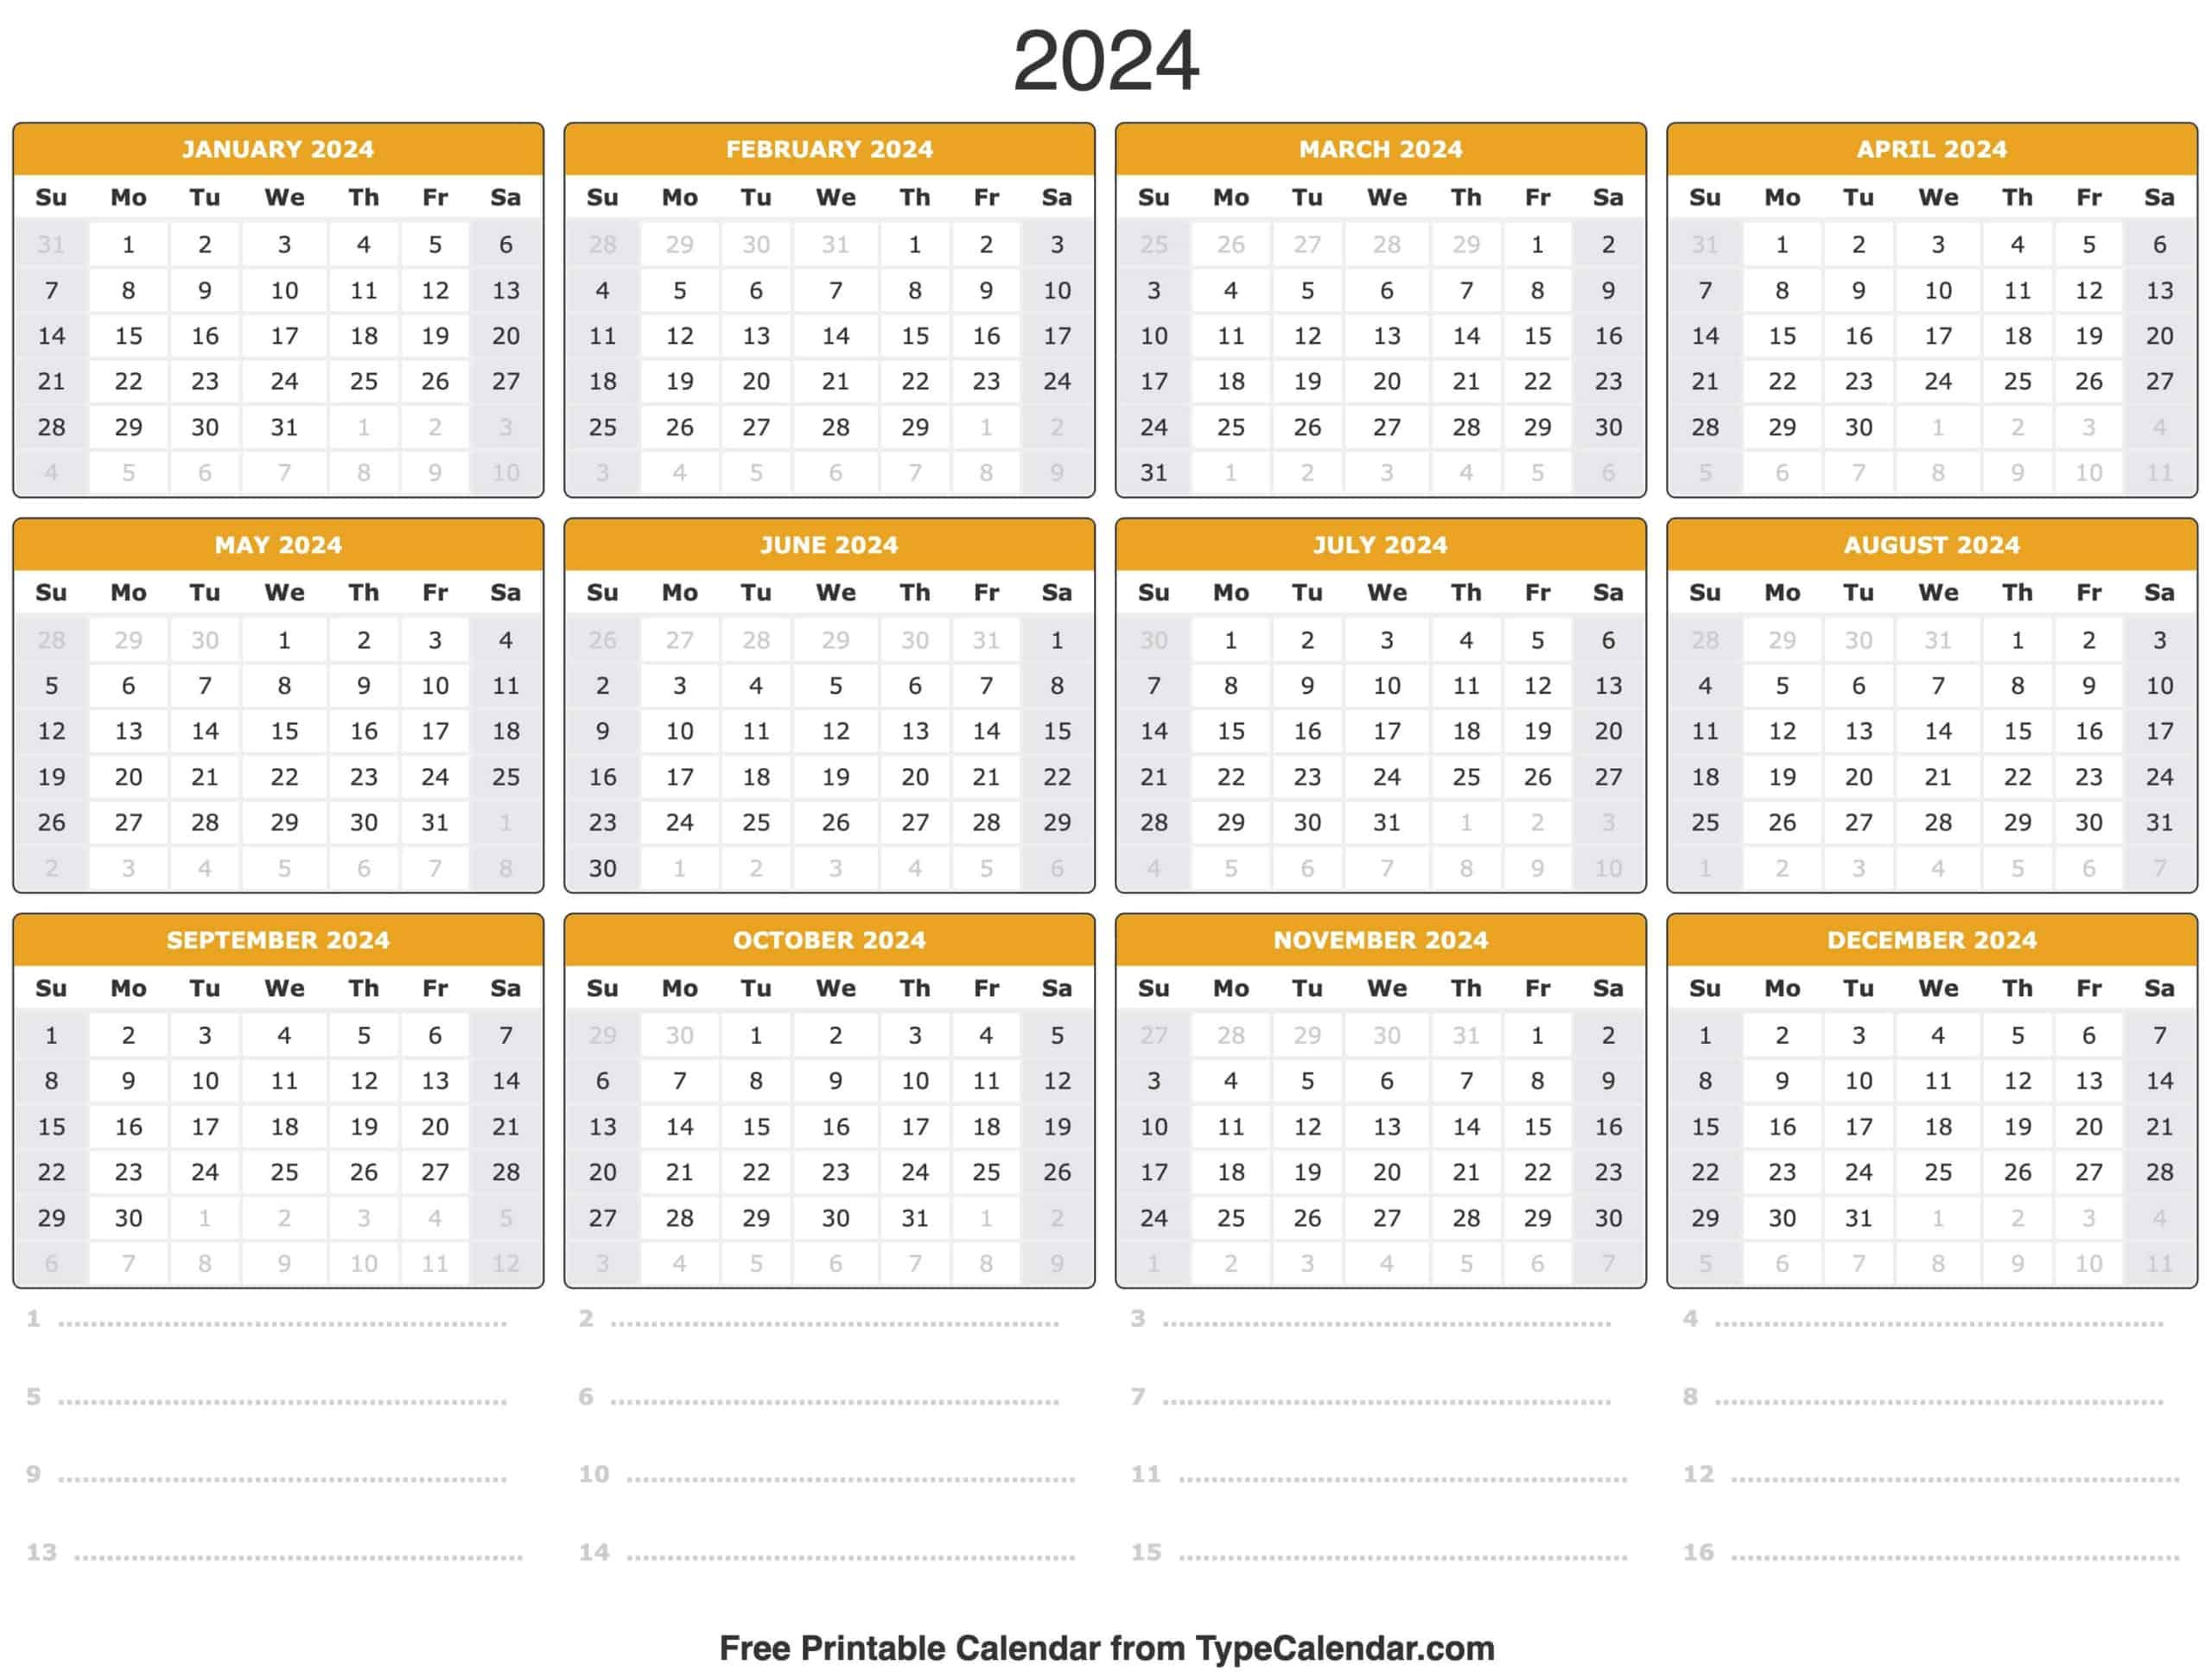 2024 Calendar: Free Printable Calendar With Holidays within 6 Month Wall Calendar Starting July 2024